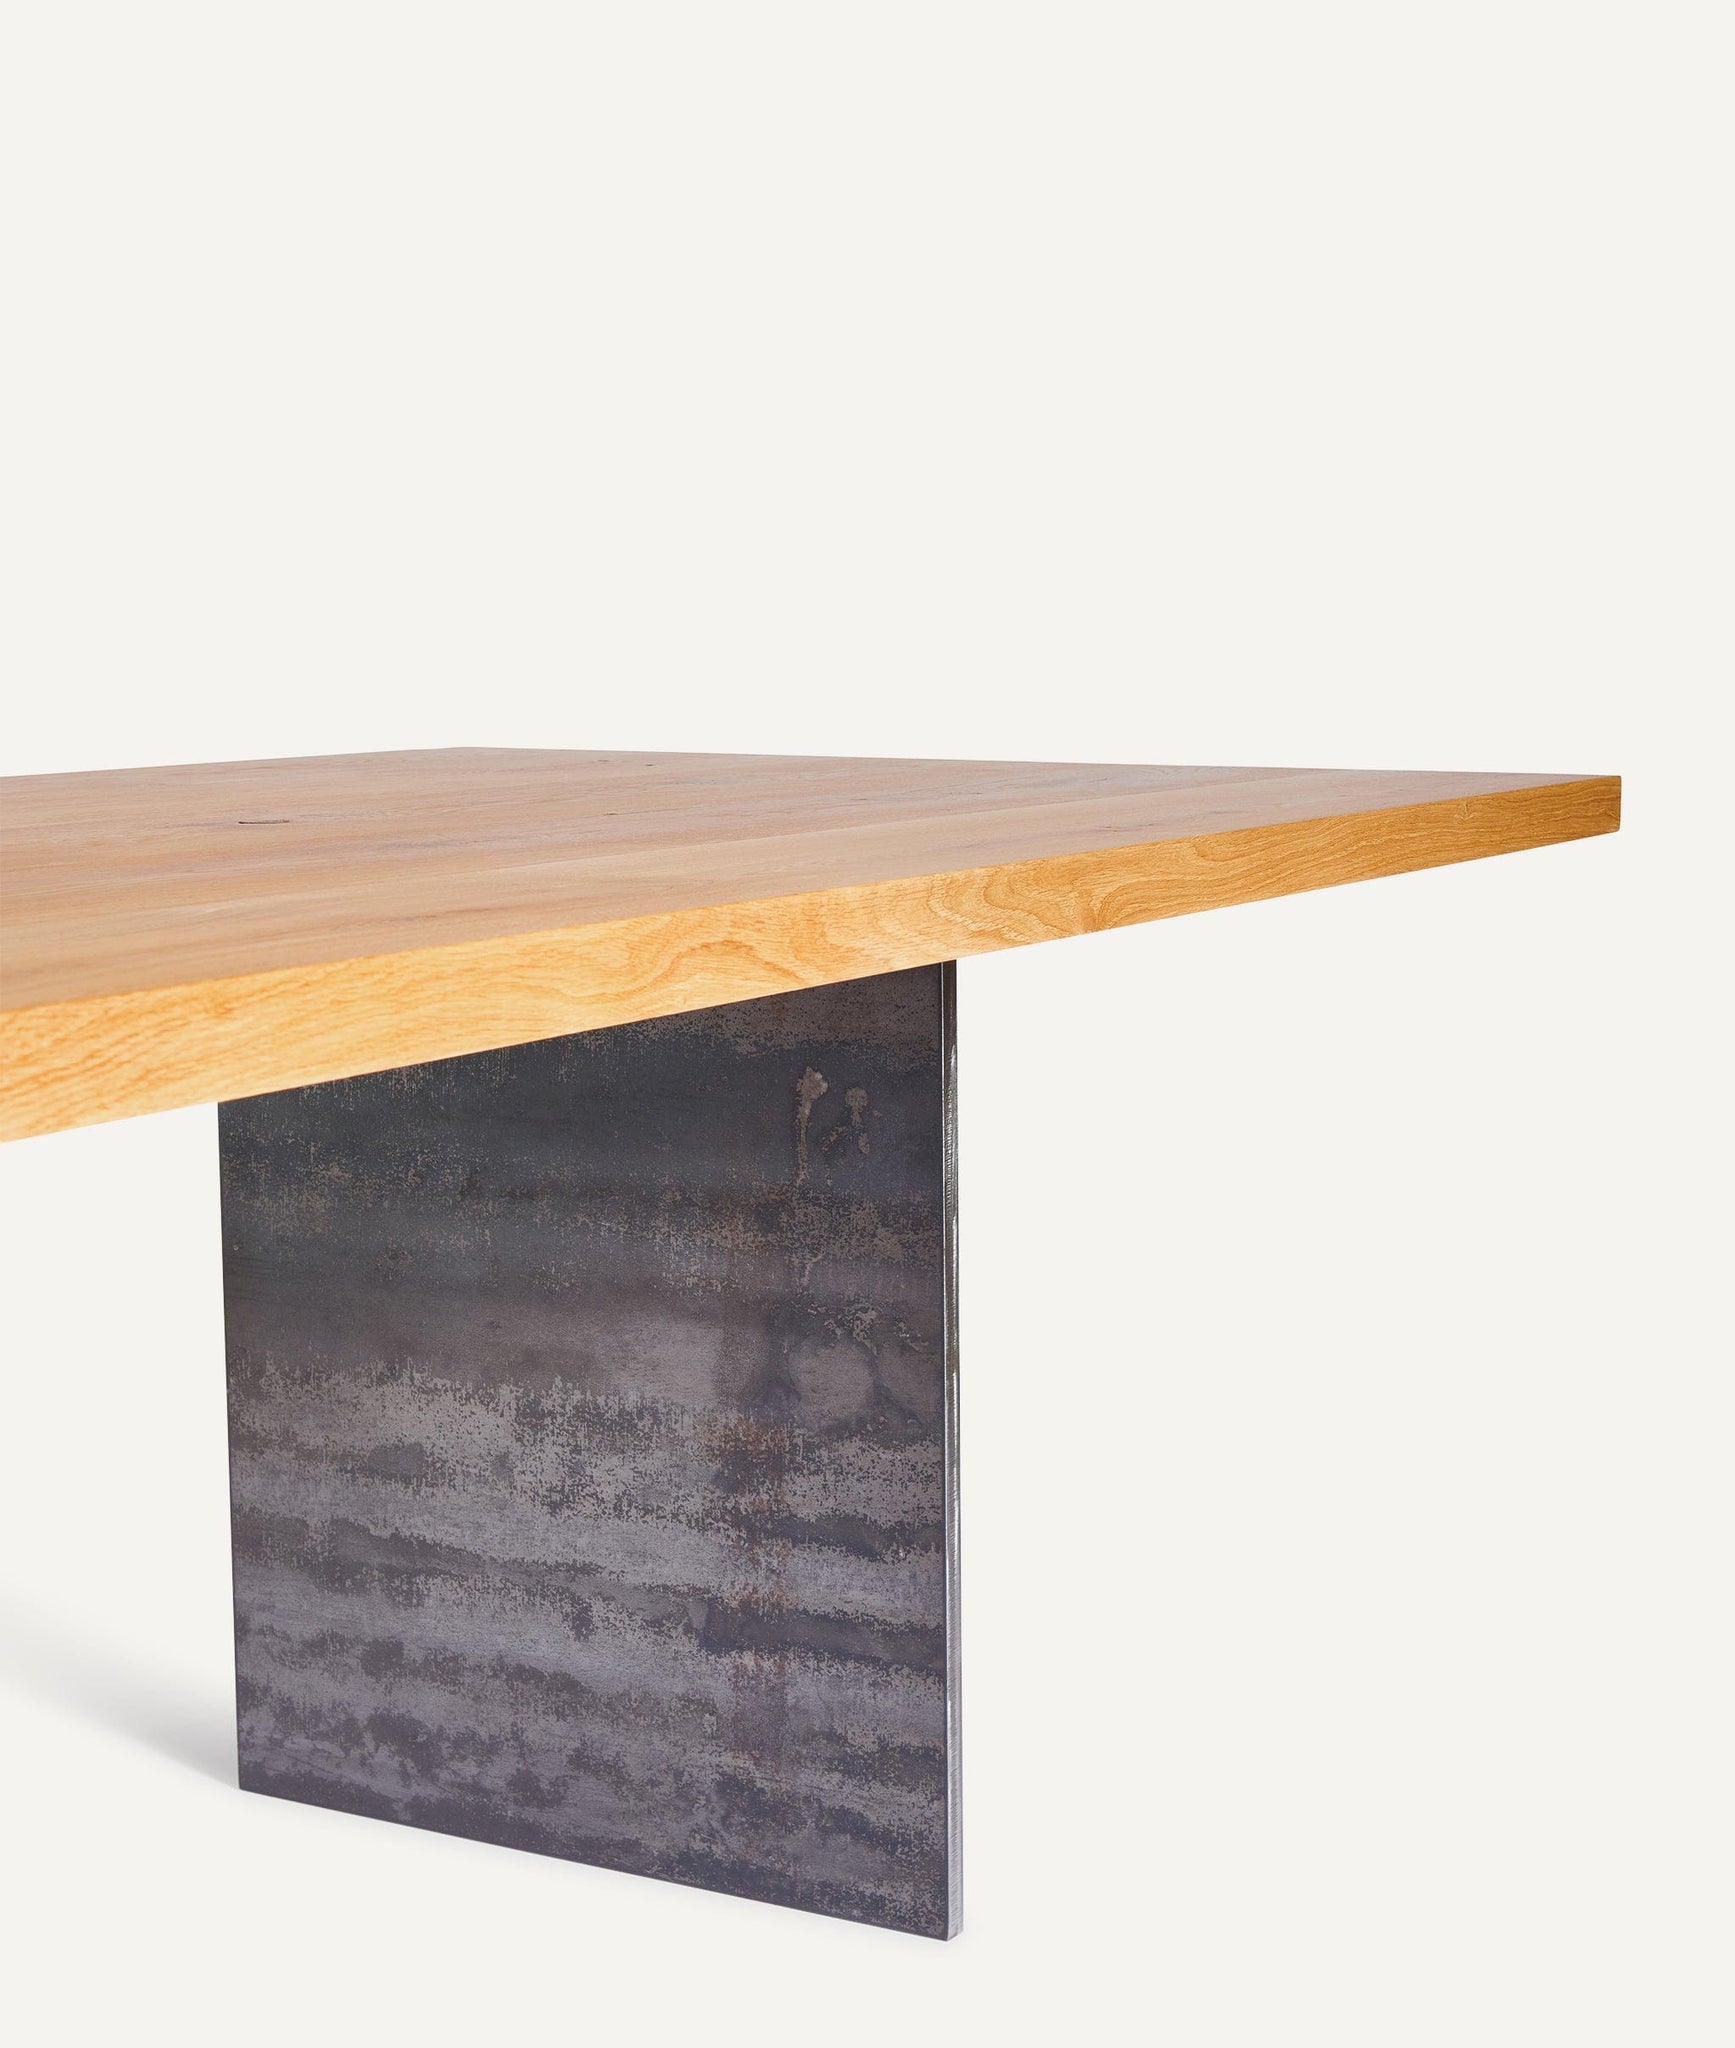 Solid Wood Table with Steel Plate Base (polished edge)